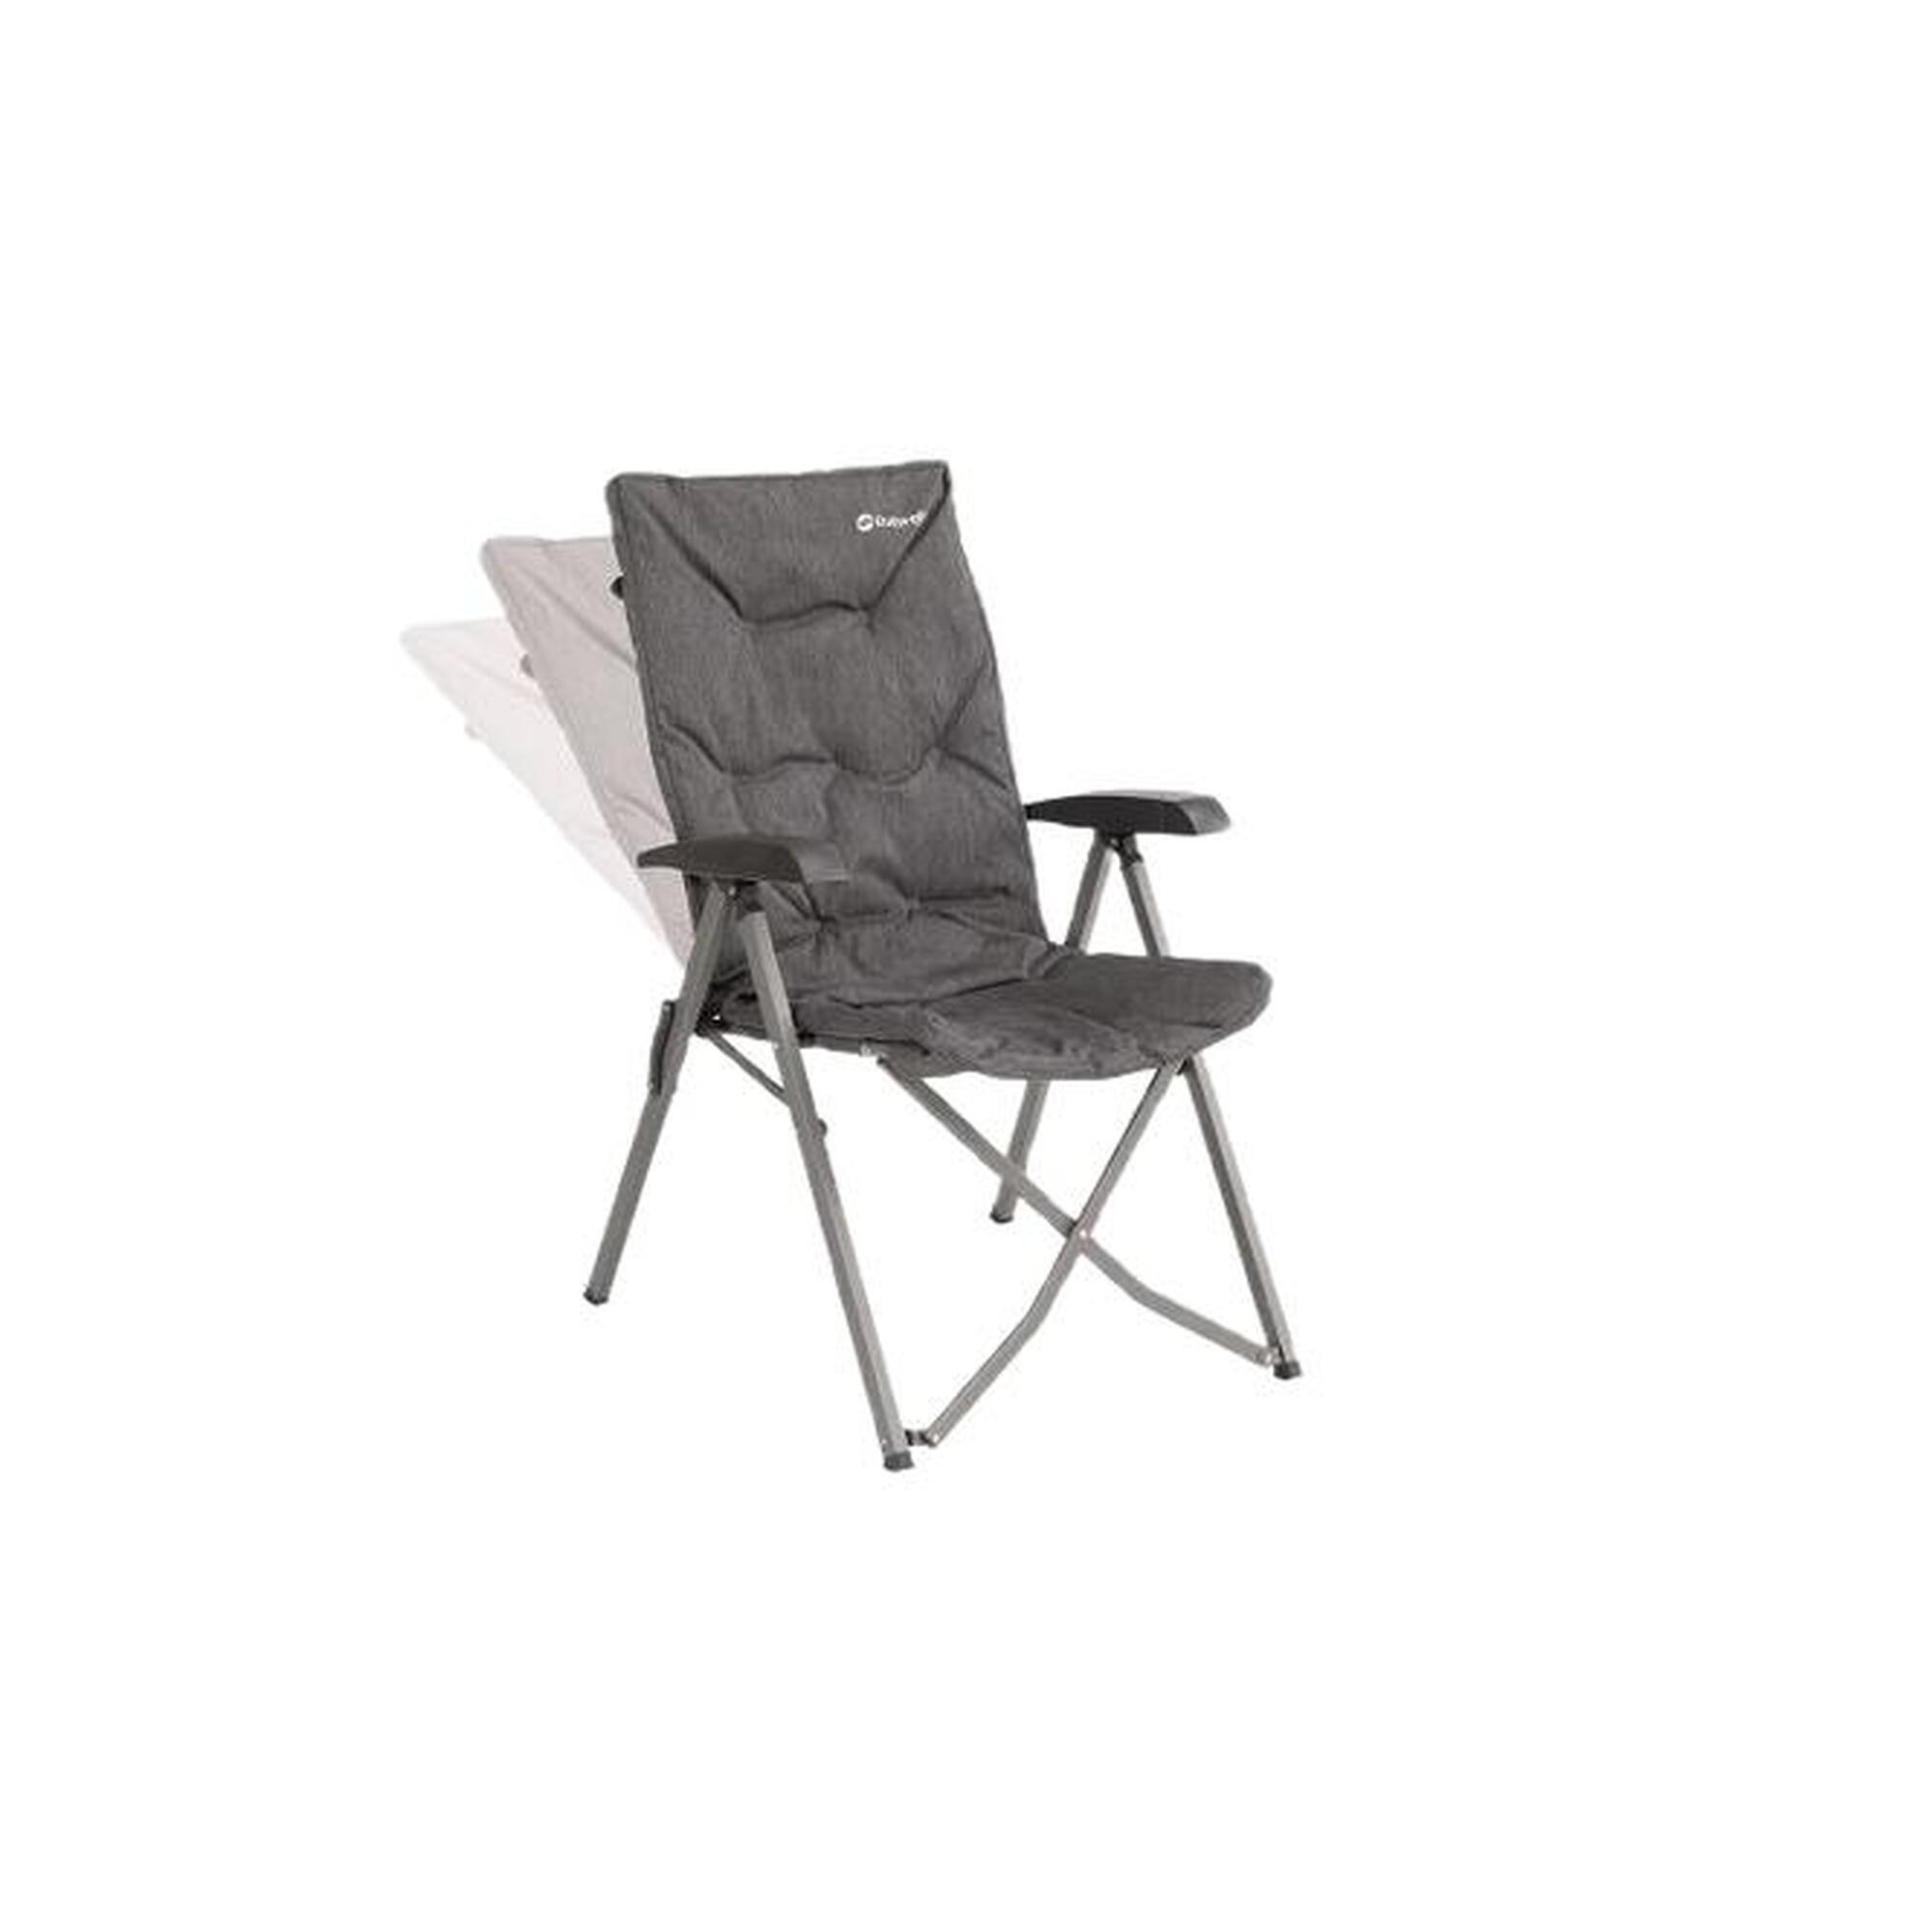 Outwell Chaise de camping pliable Yellowstone Lake Gris